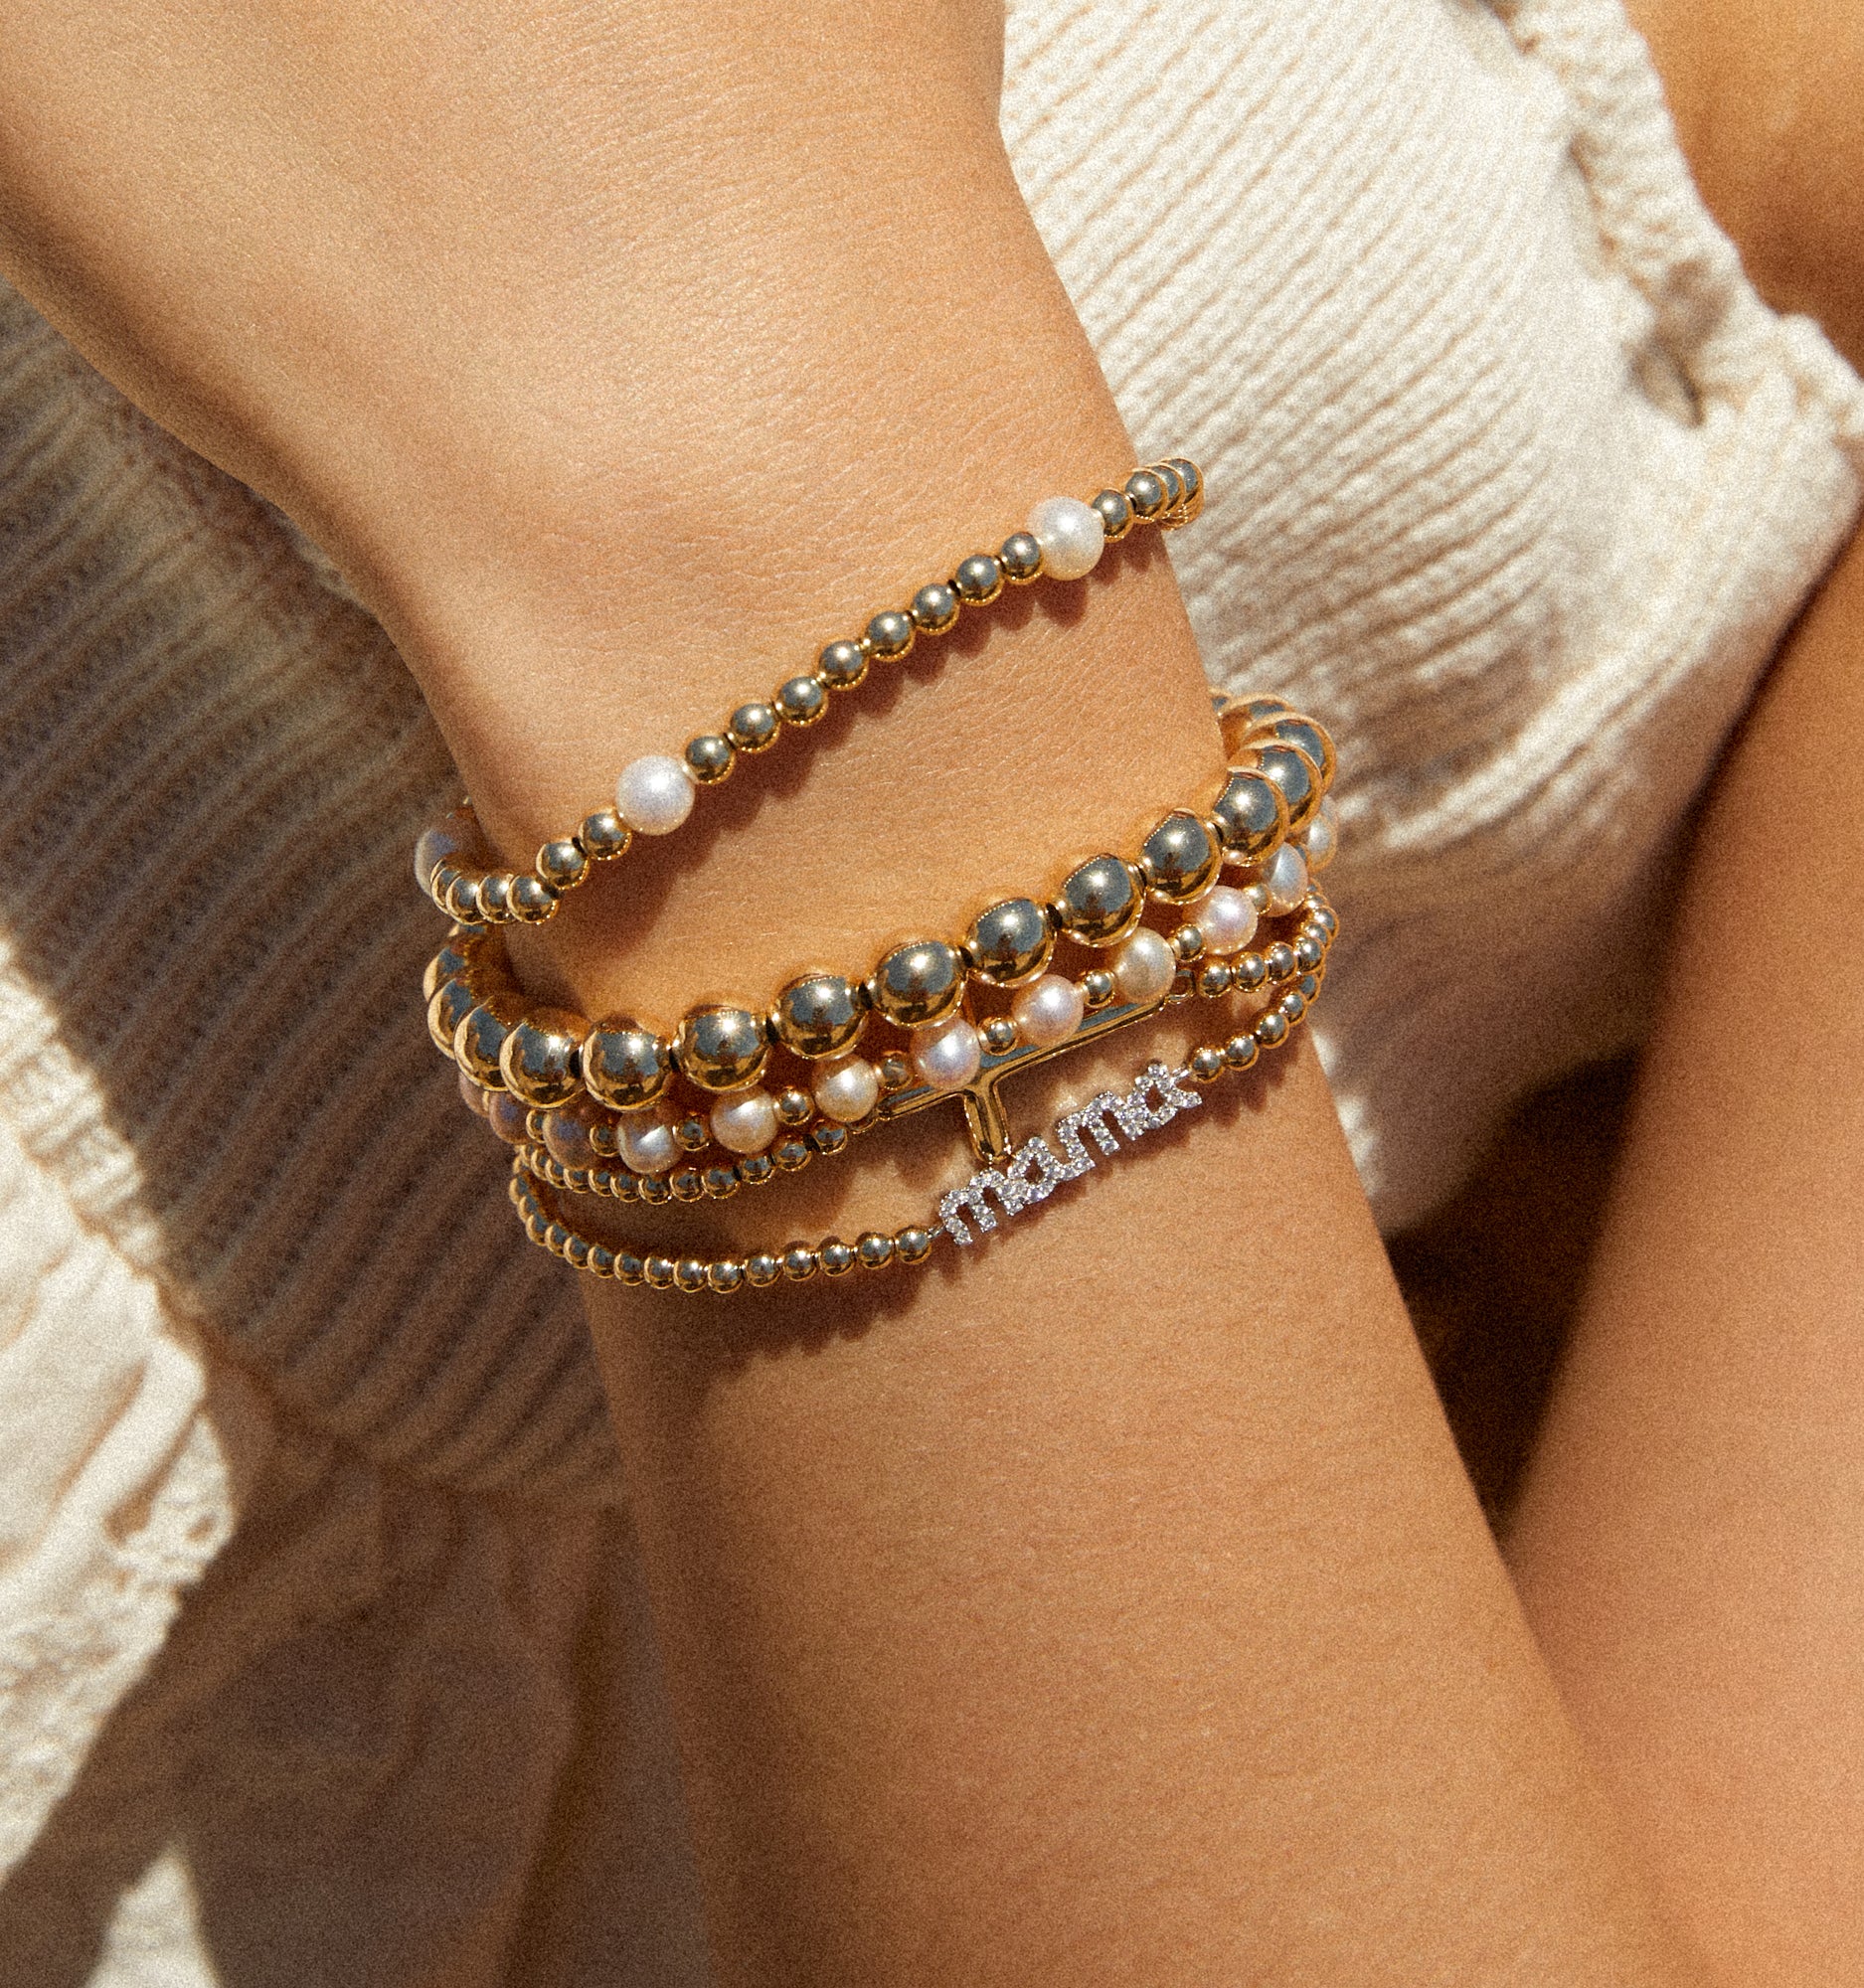 Beaded Bracelet With Pearls